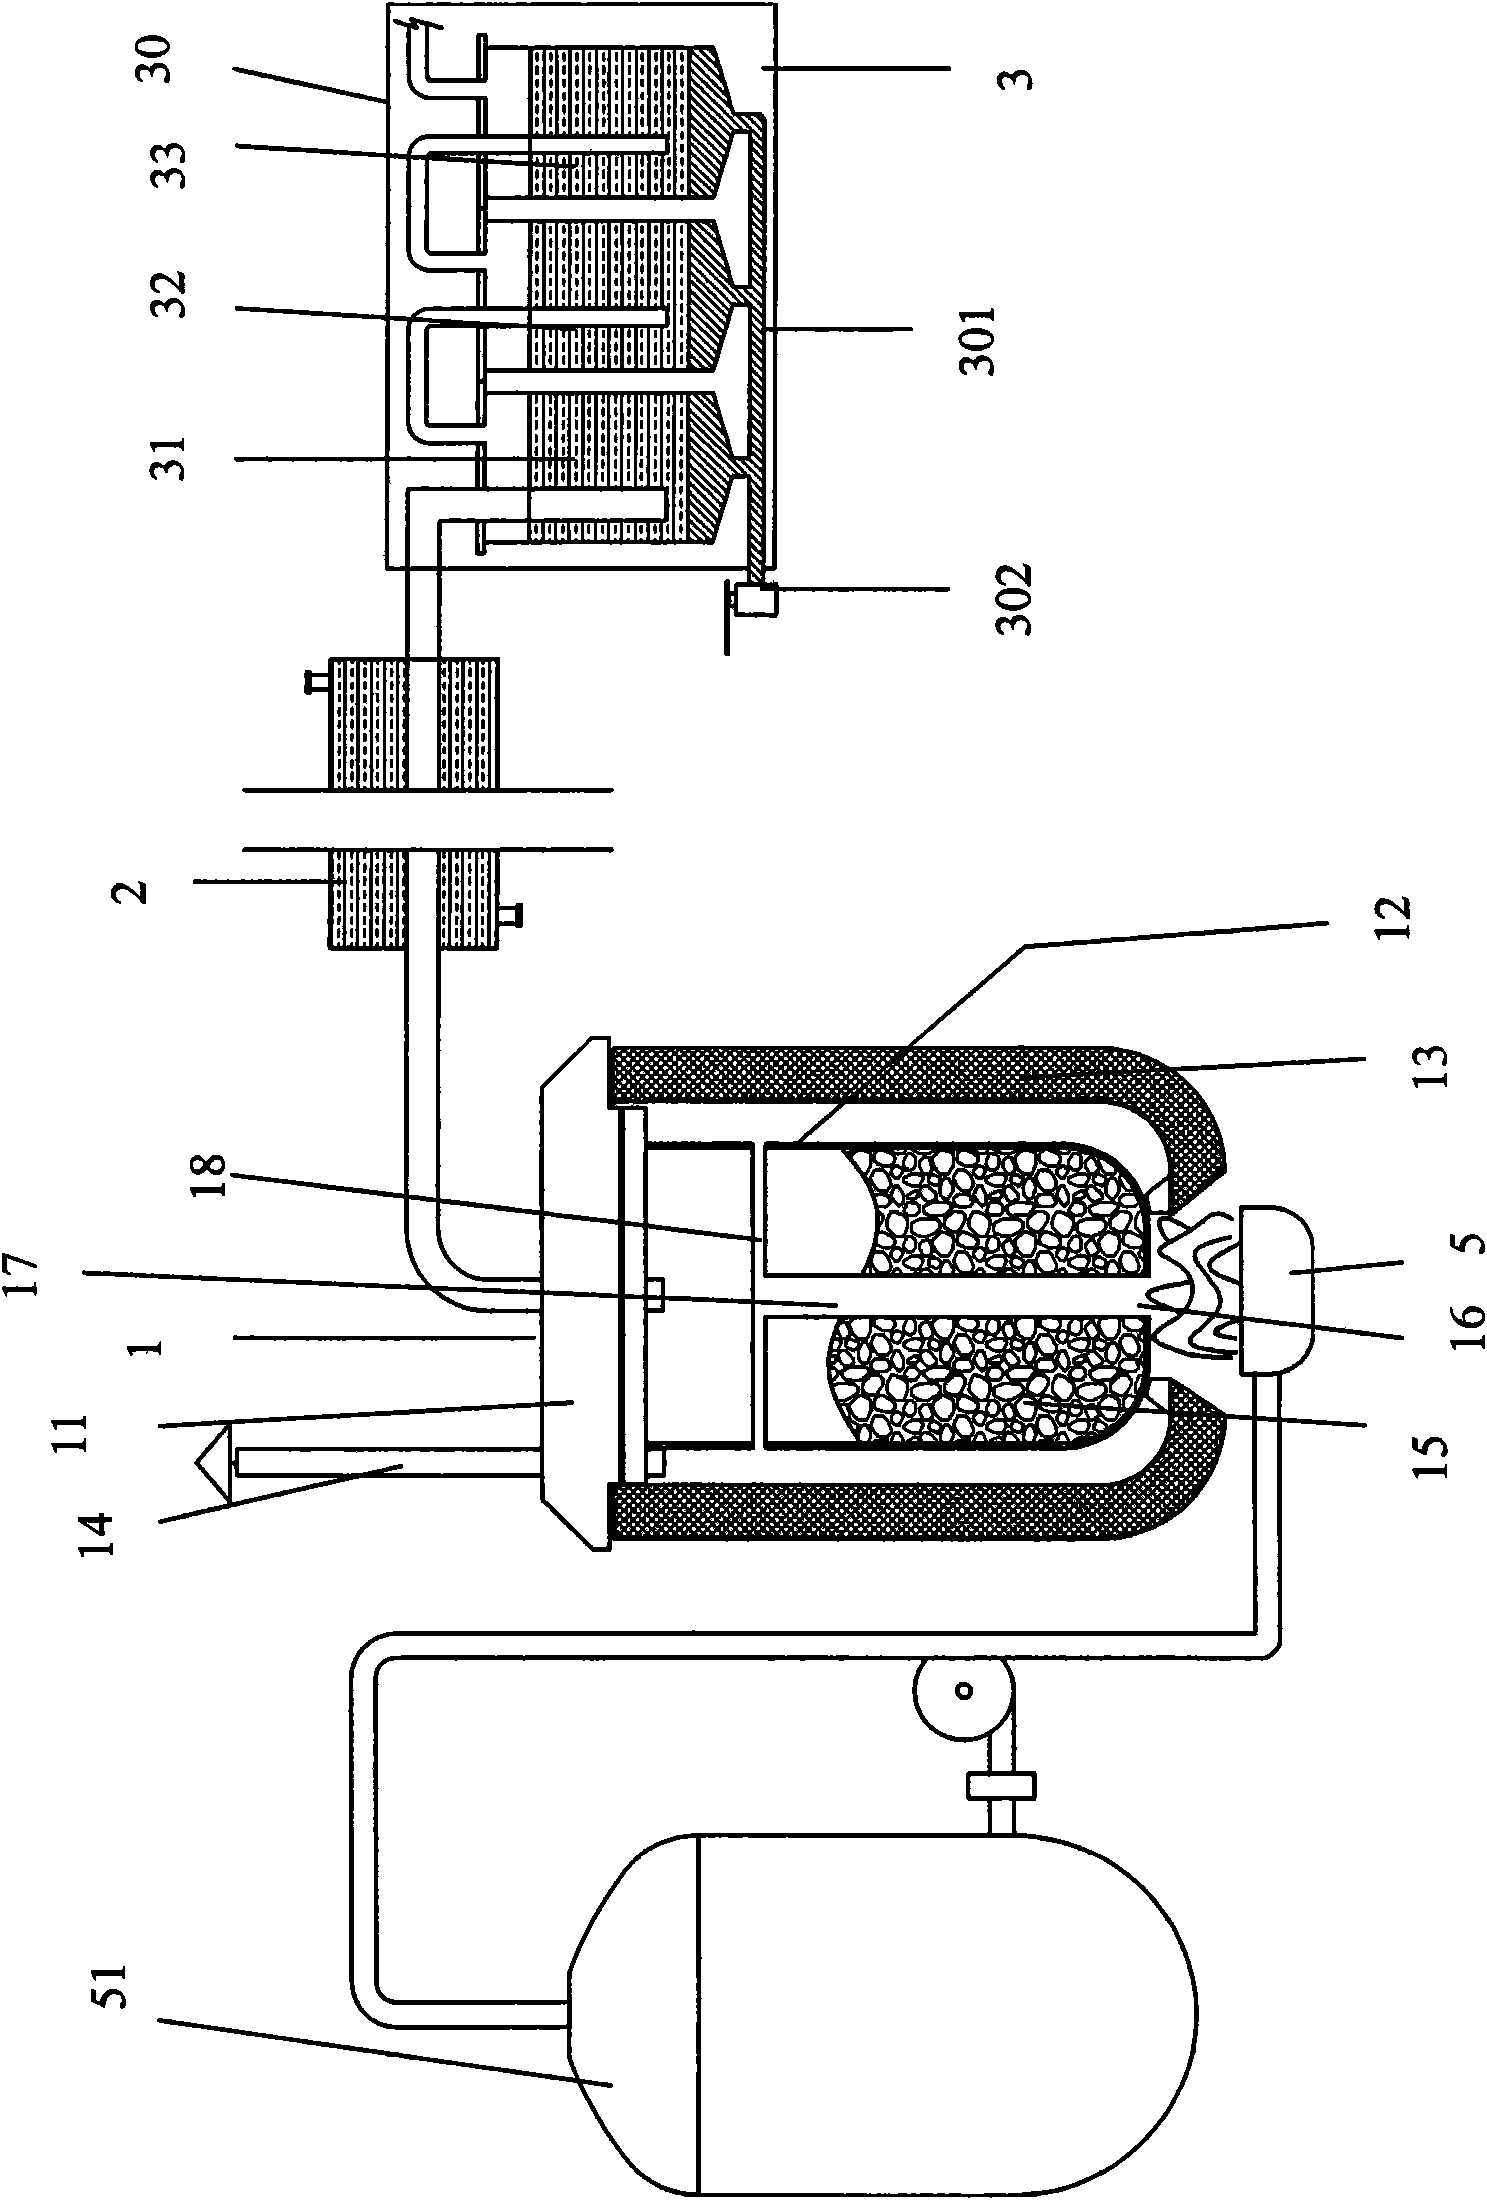 Device and method for recovering glass reinforced plastic by pyrolysis